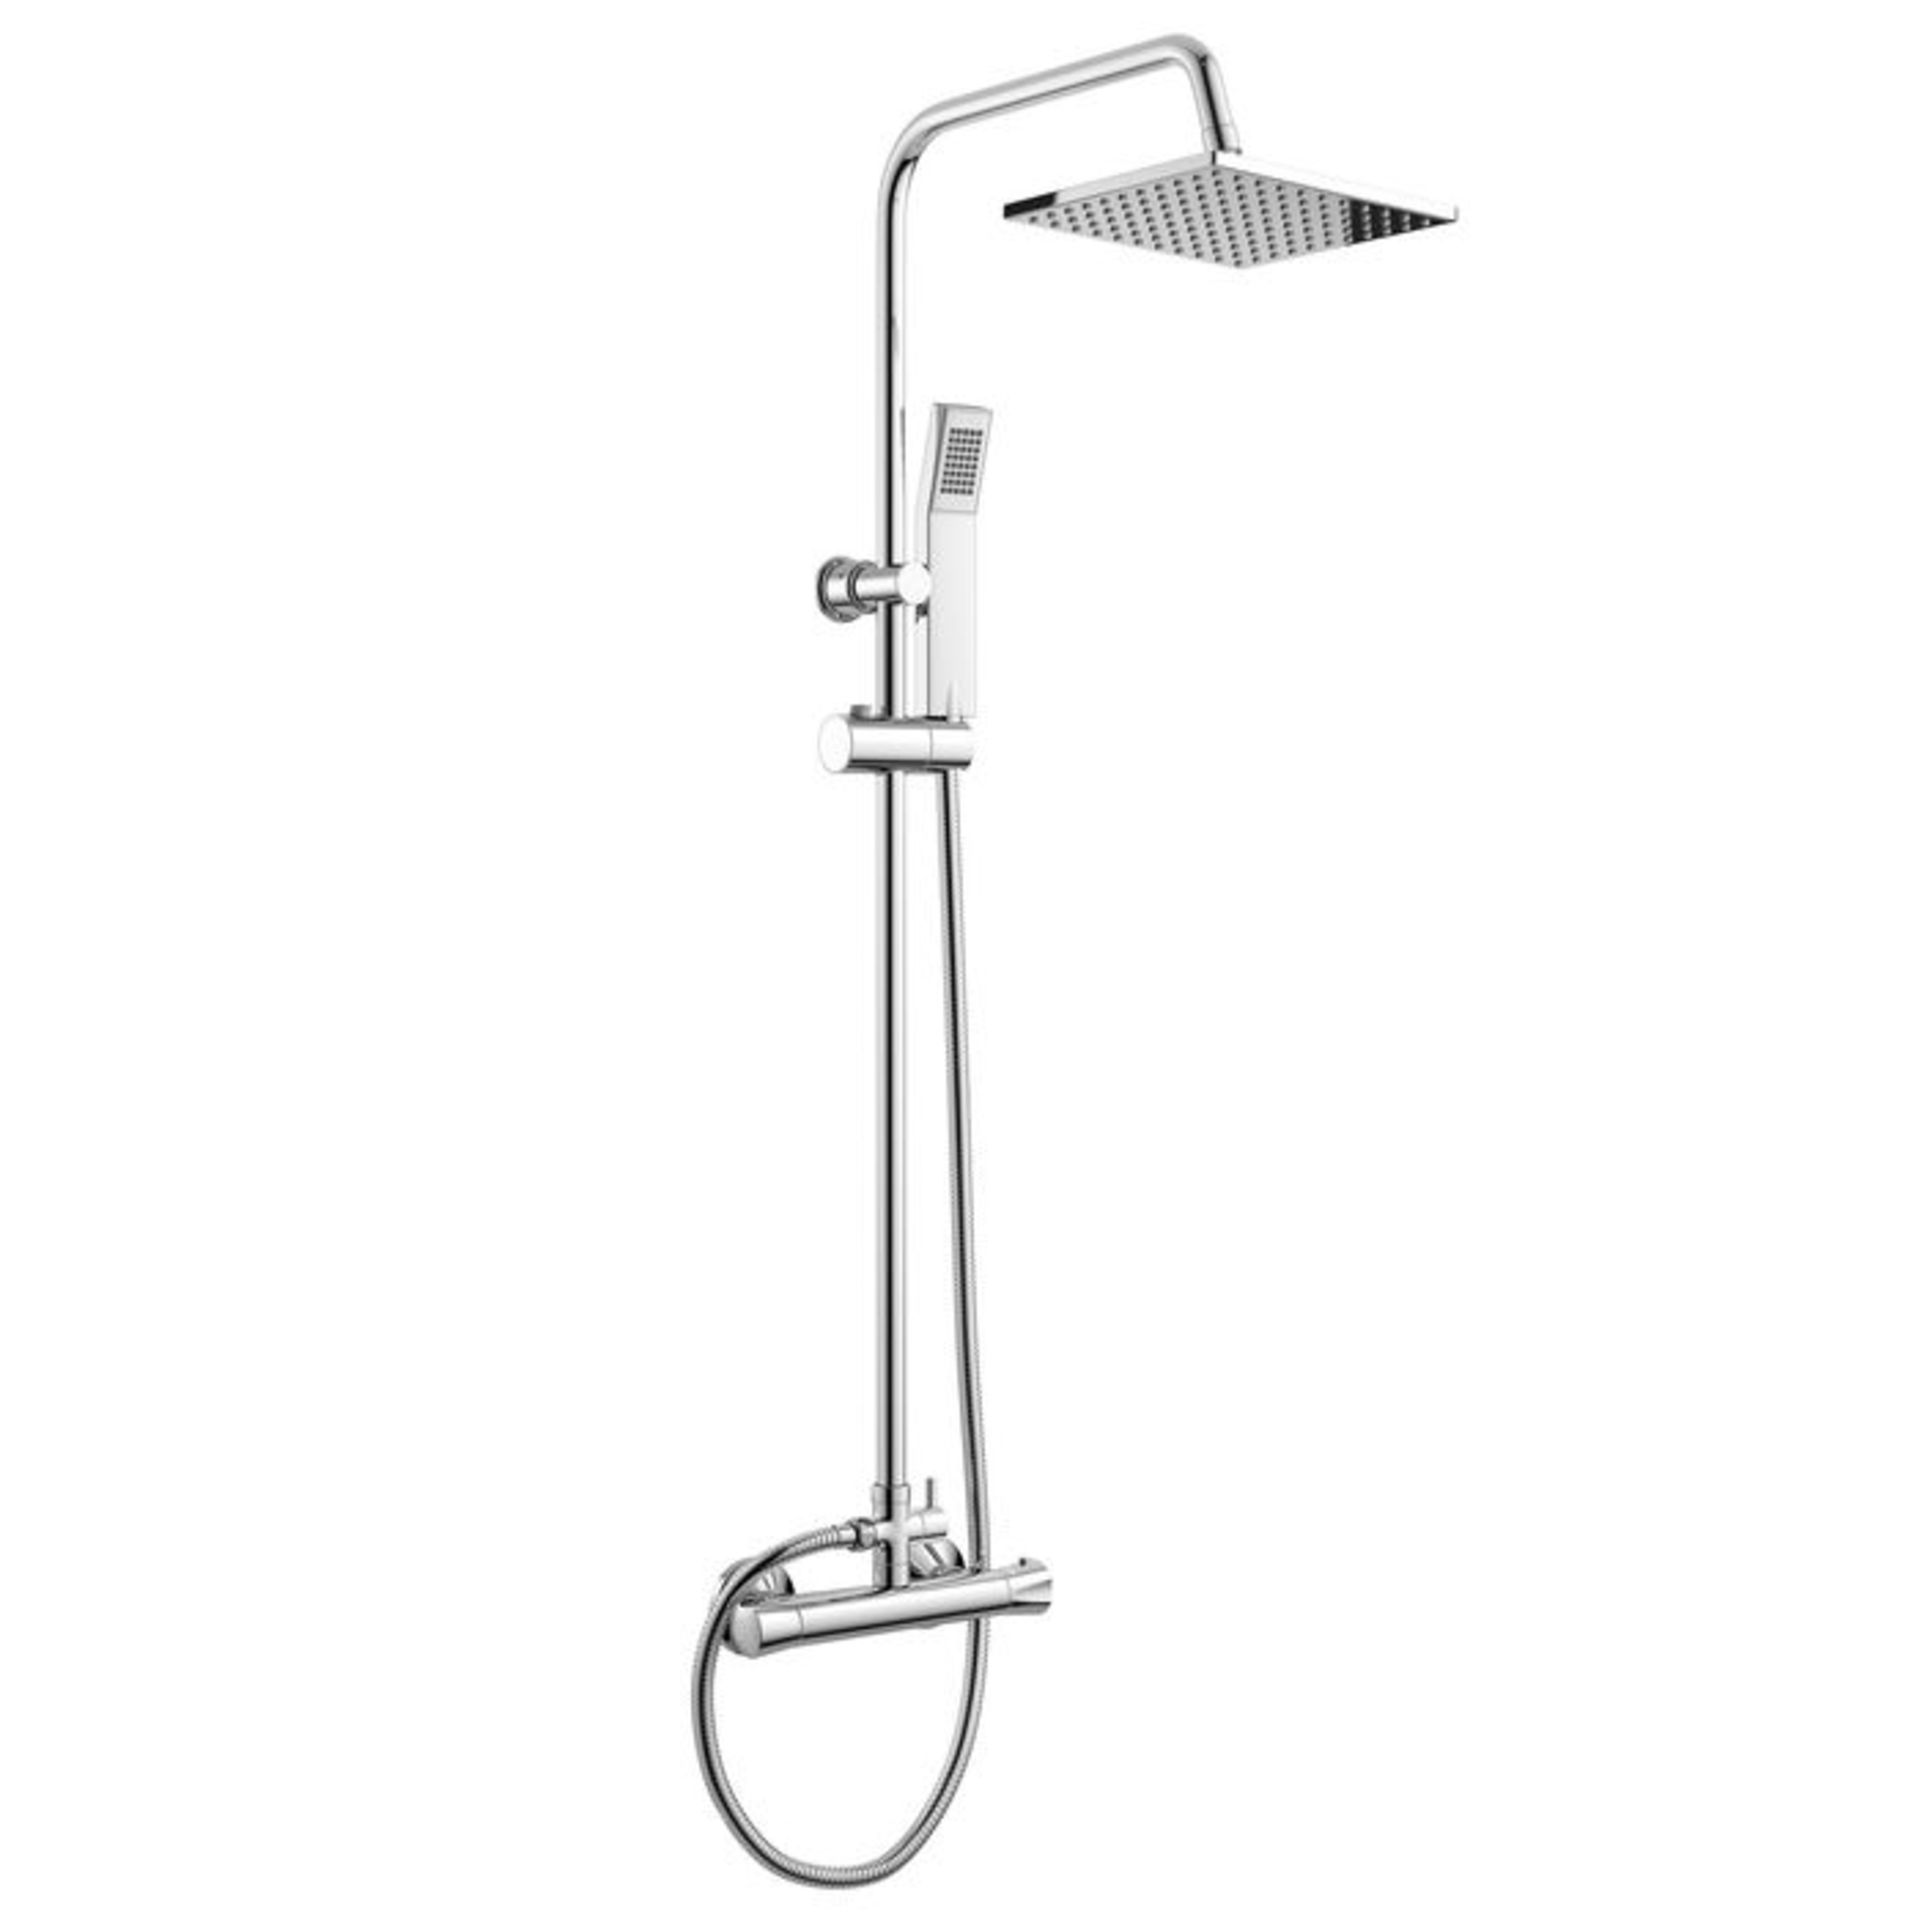 (AA116) Square Exposed Thermostatic Shower Kit & Medium Head. Curved features and contemporary - Image 2 of 2